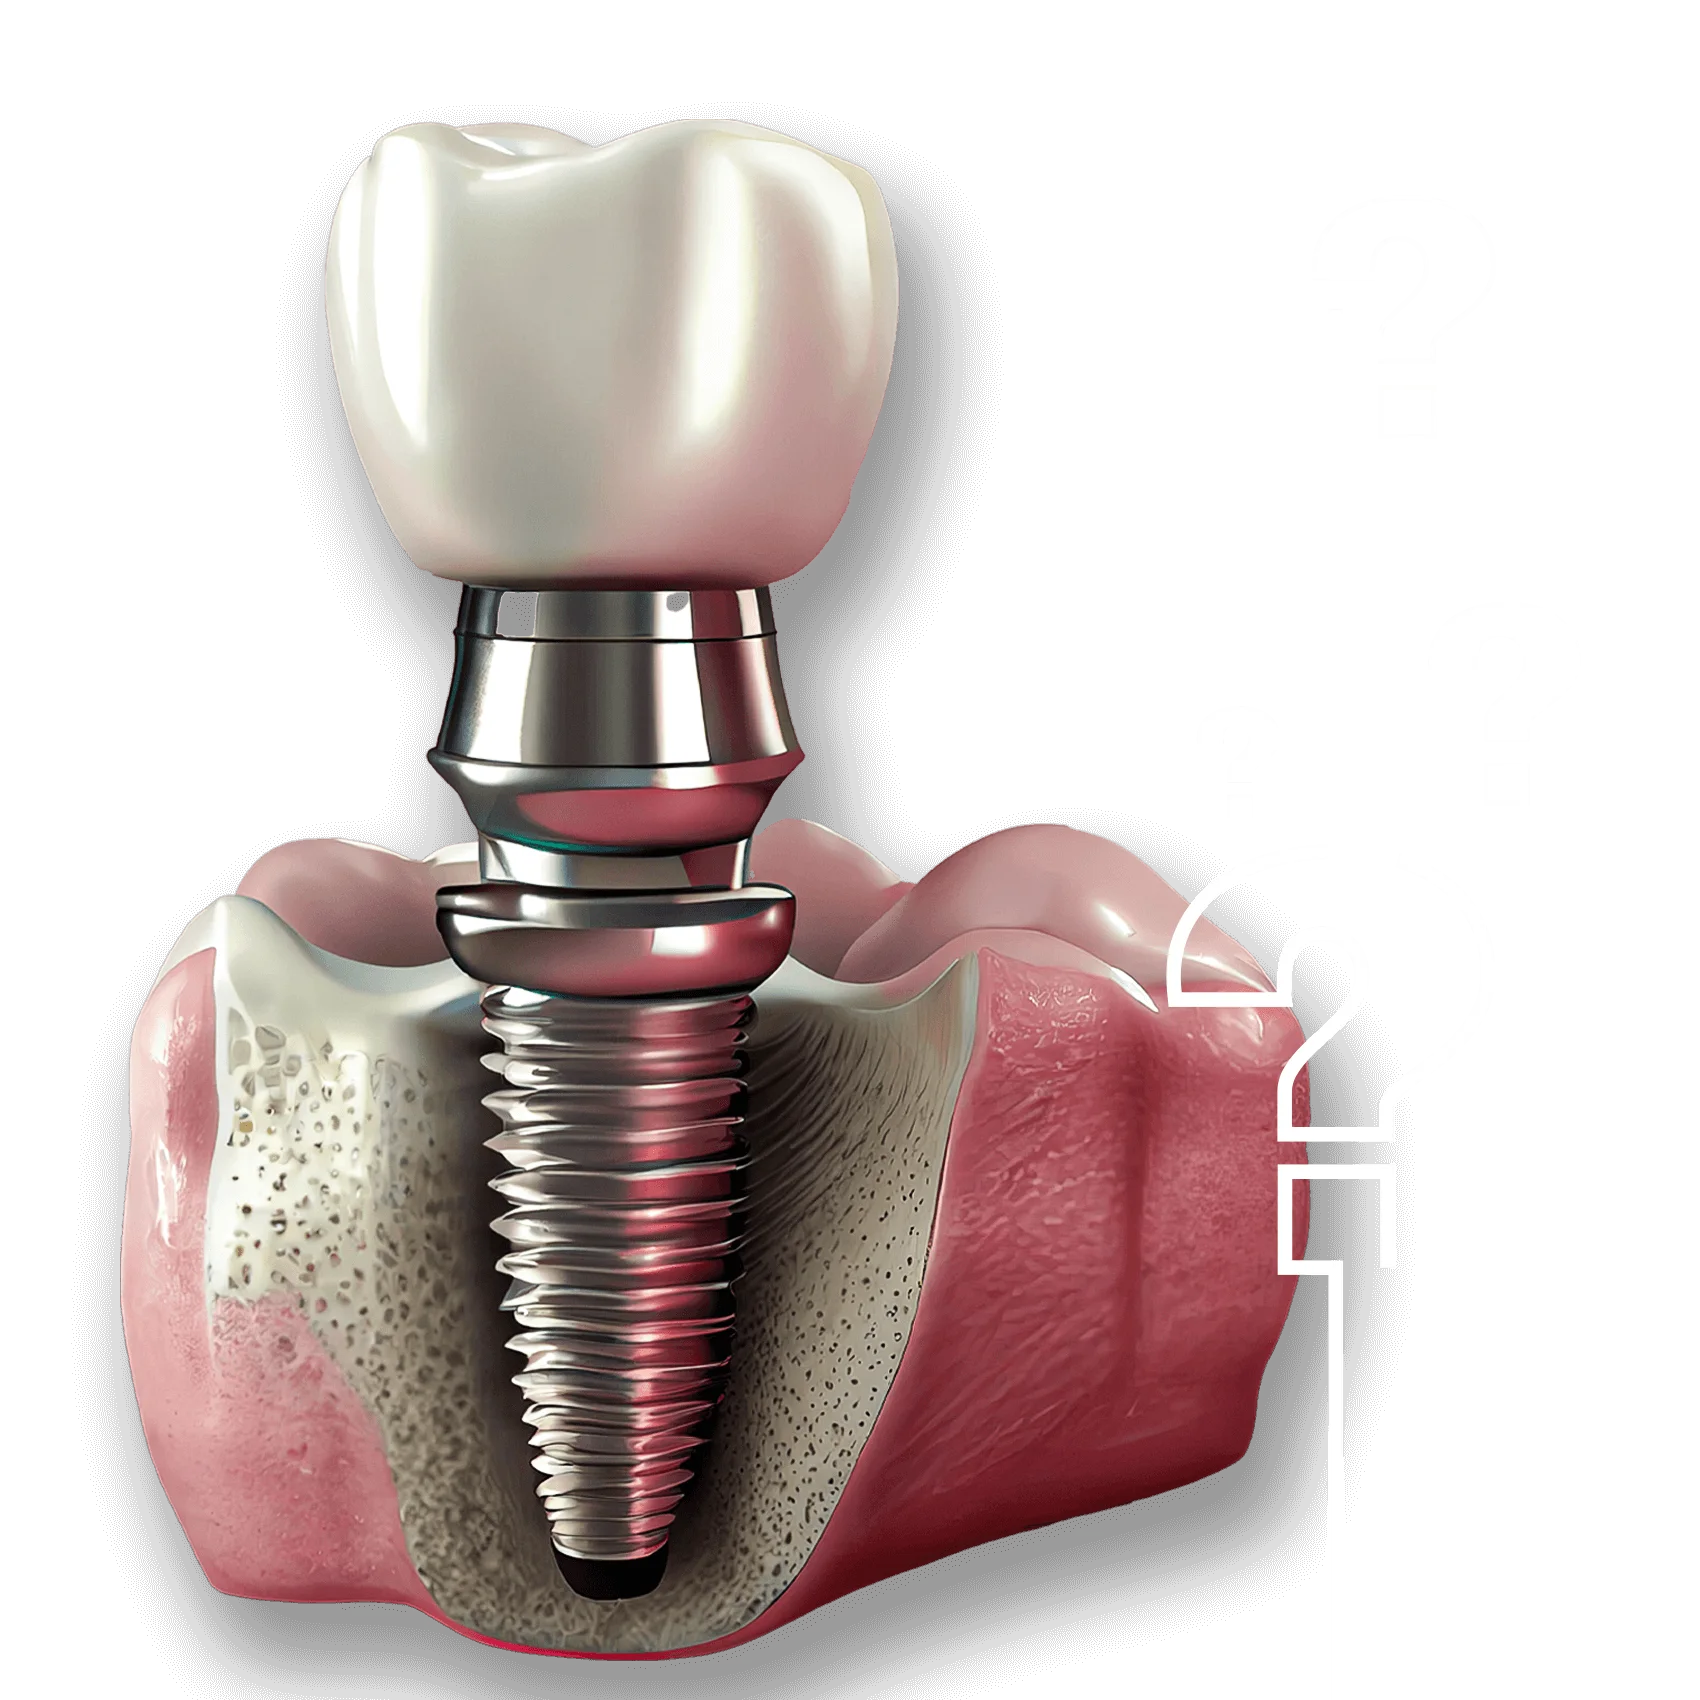 How Much Does Dental Implants Cost